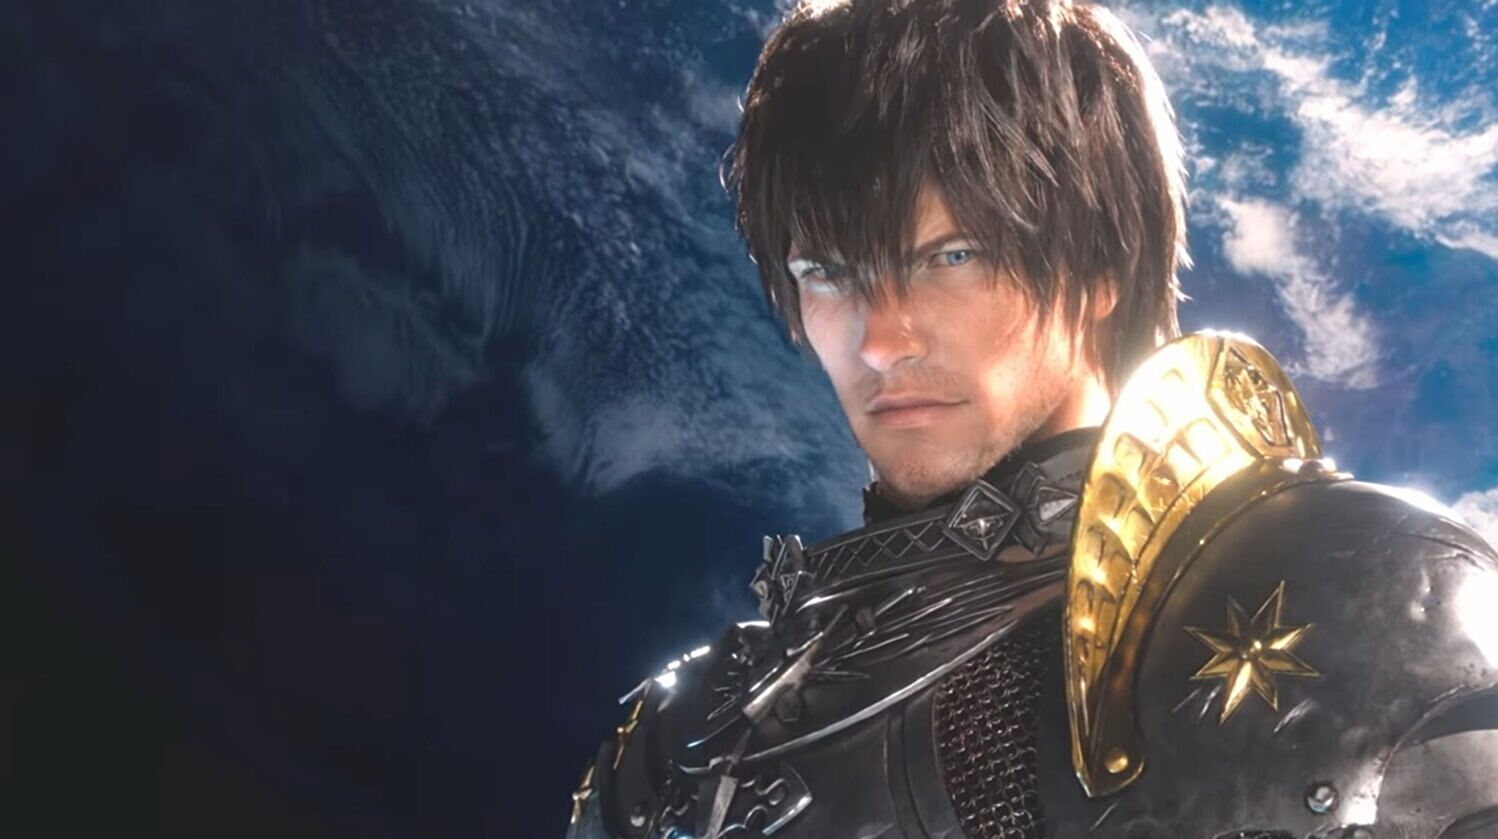 Square Enix Promises Extra Free Game Time For Those Long Final Fantasy 14 Endwalker Queues 1638718525851